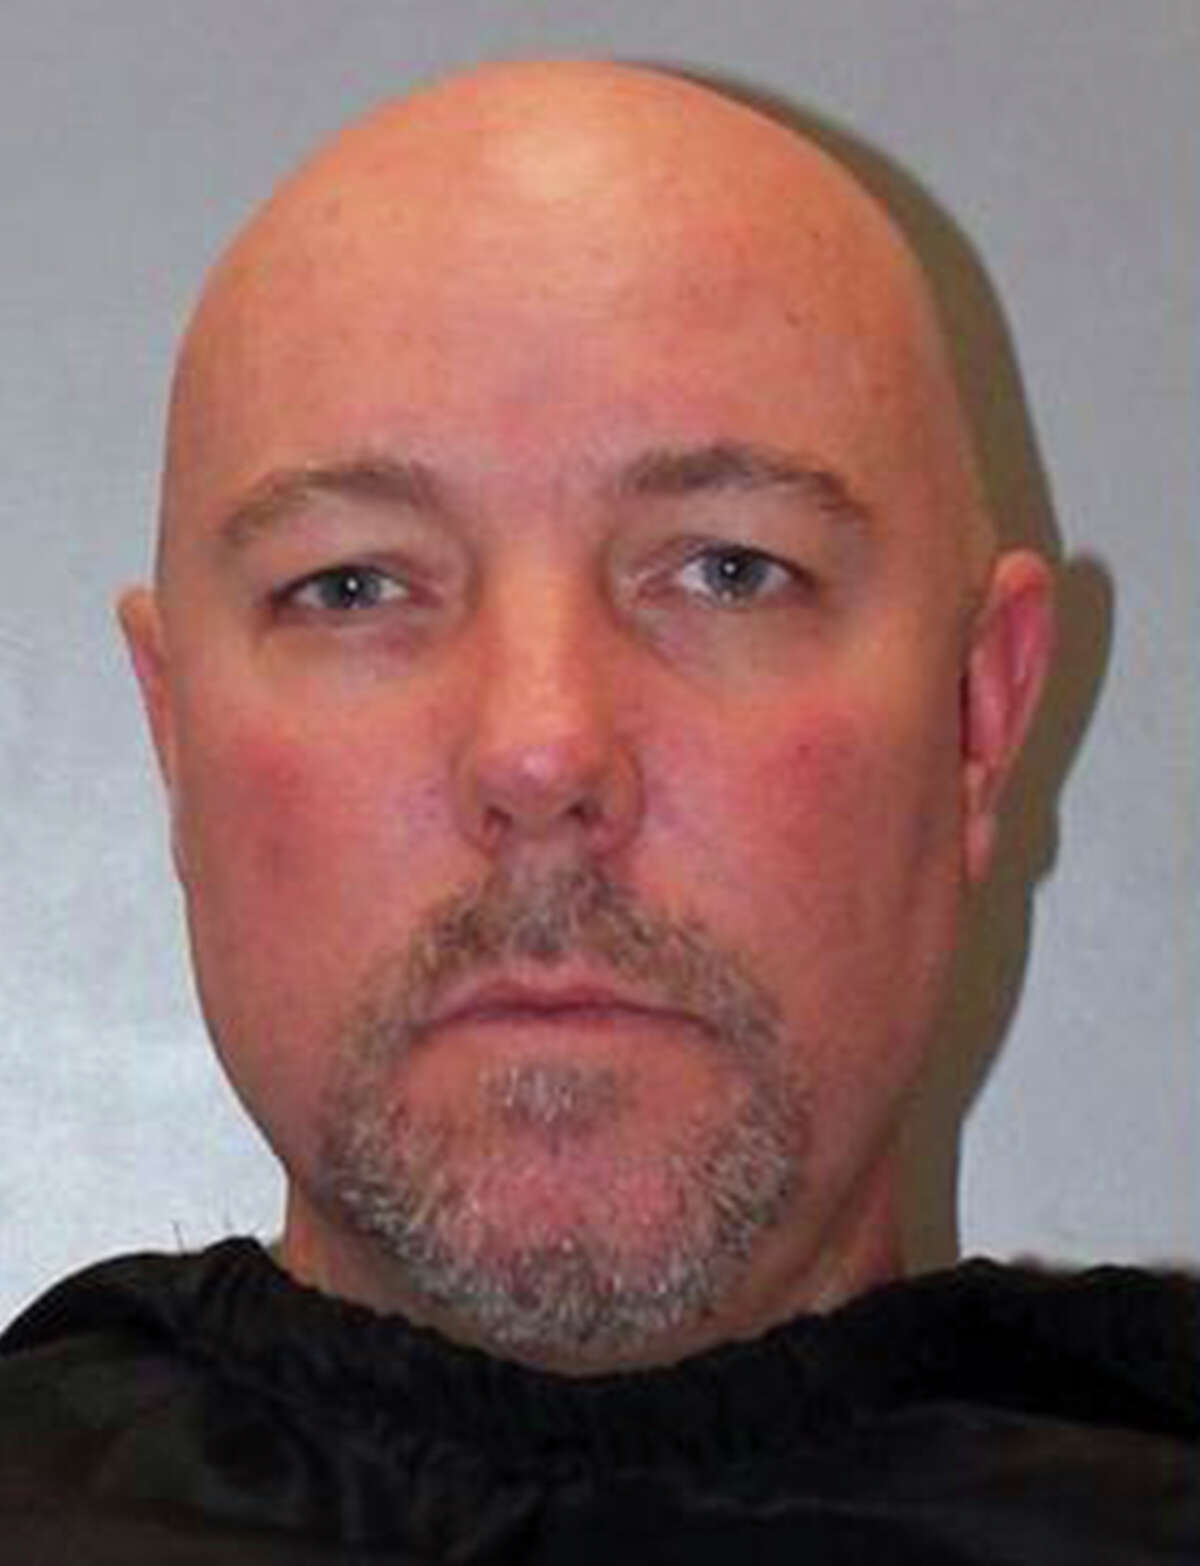 Mark Aderholt's mugshot following his arrest in South Carolina on charges that he sexually molested Anne Marie Miller as a teenager.